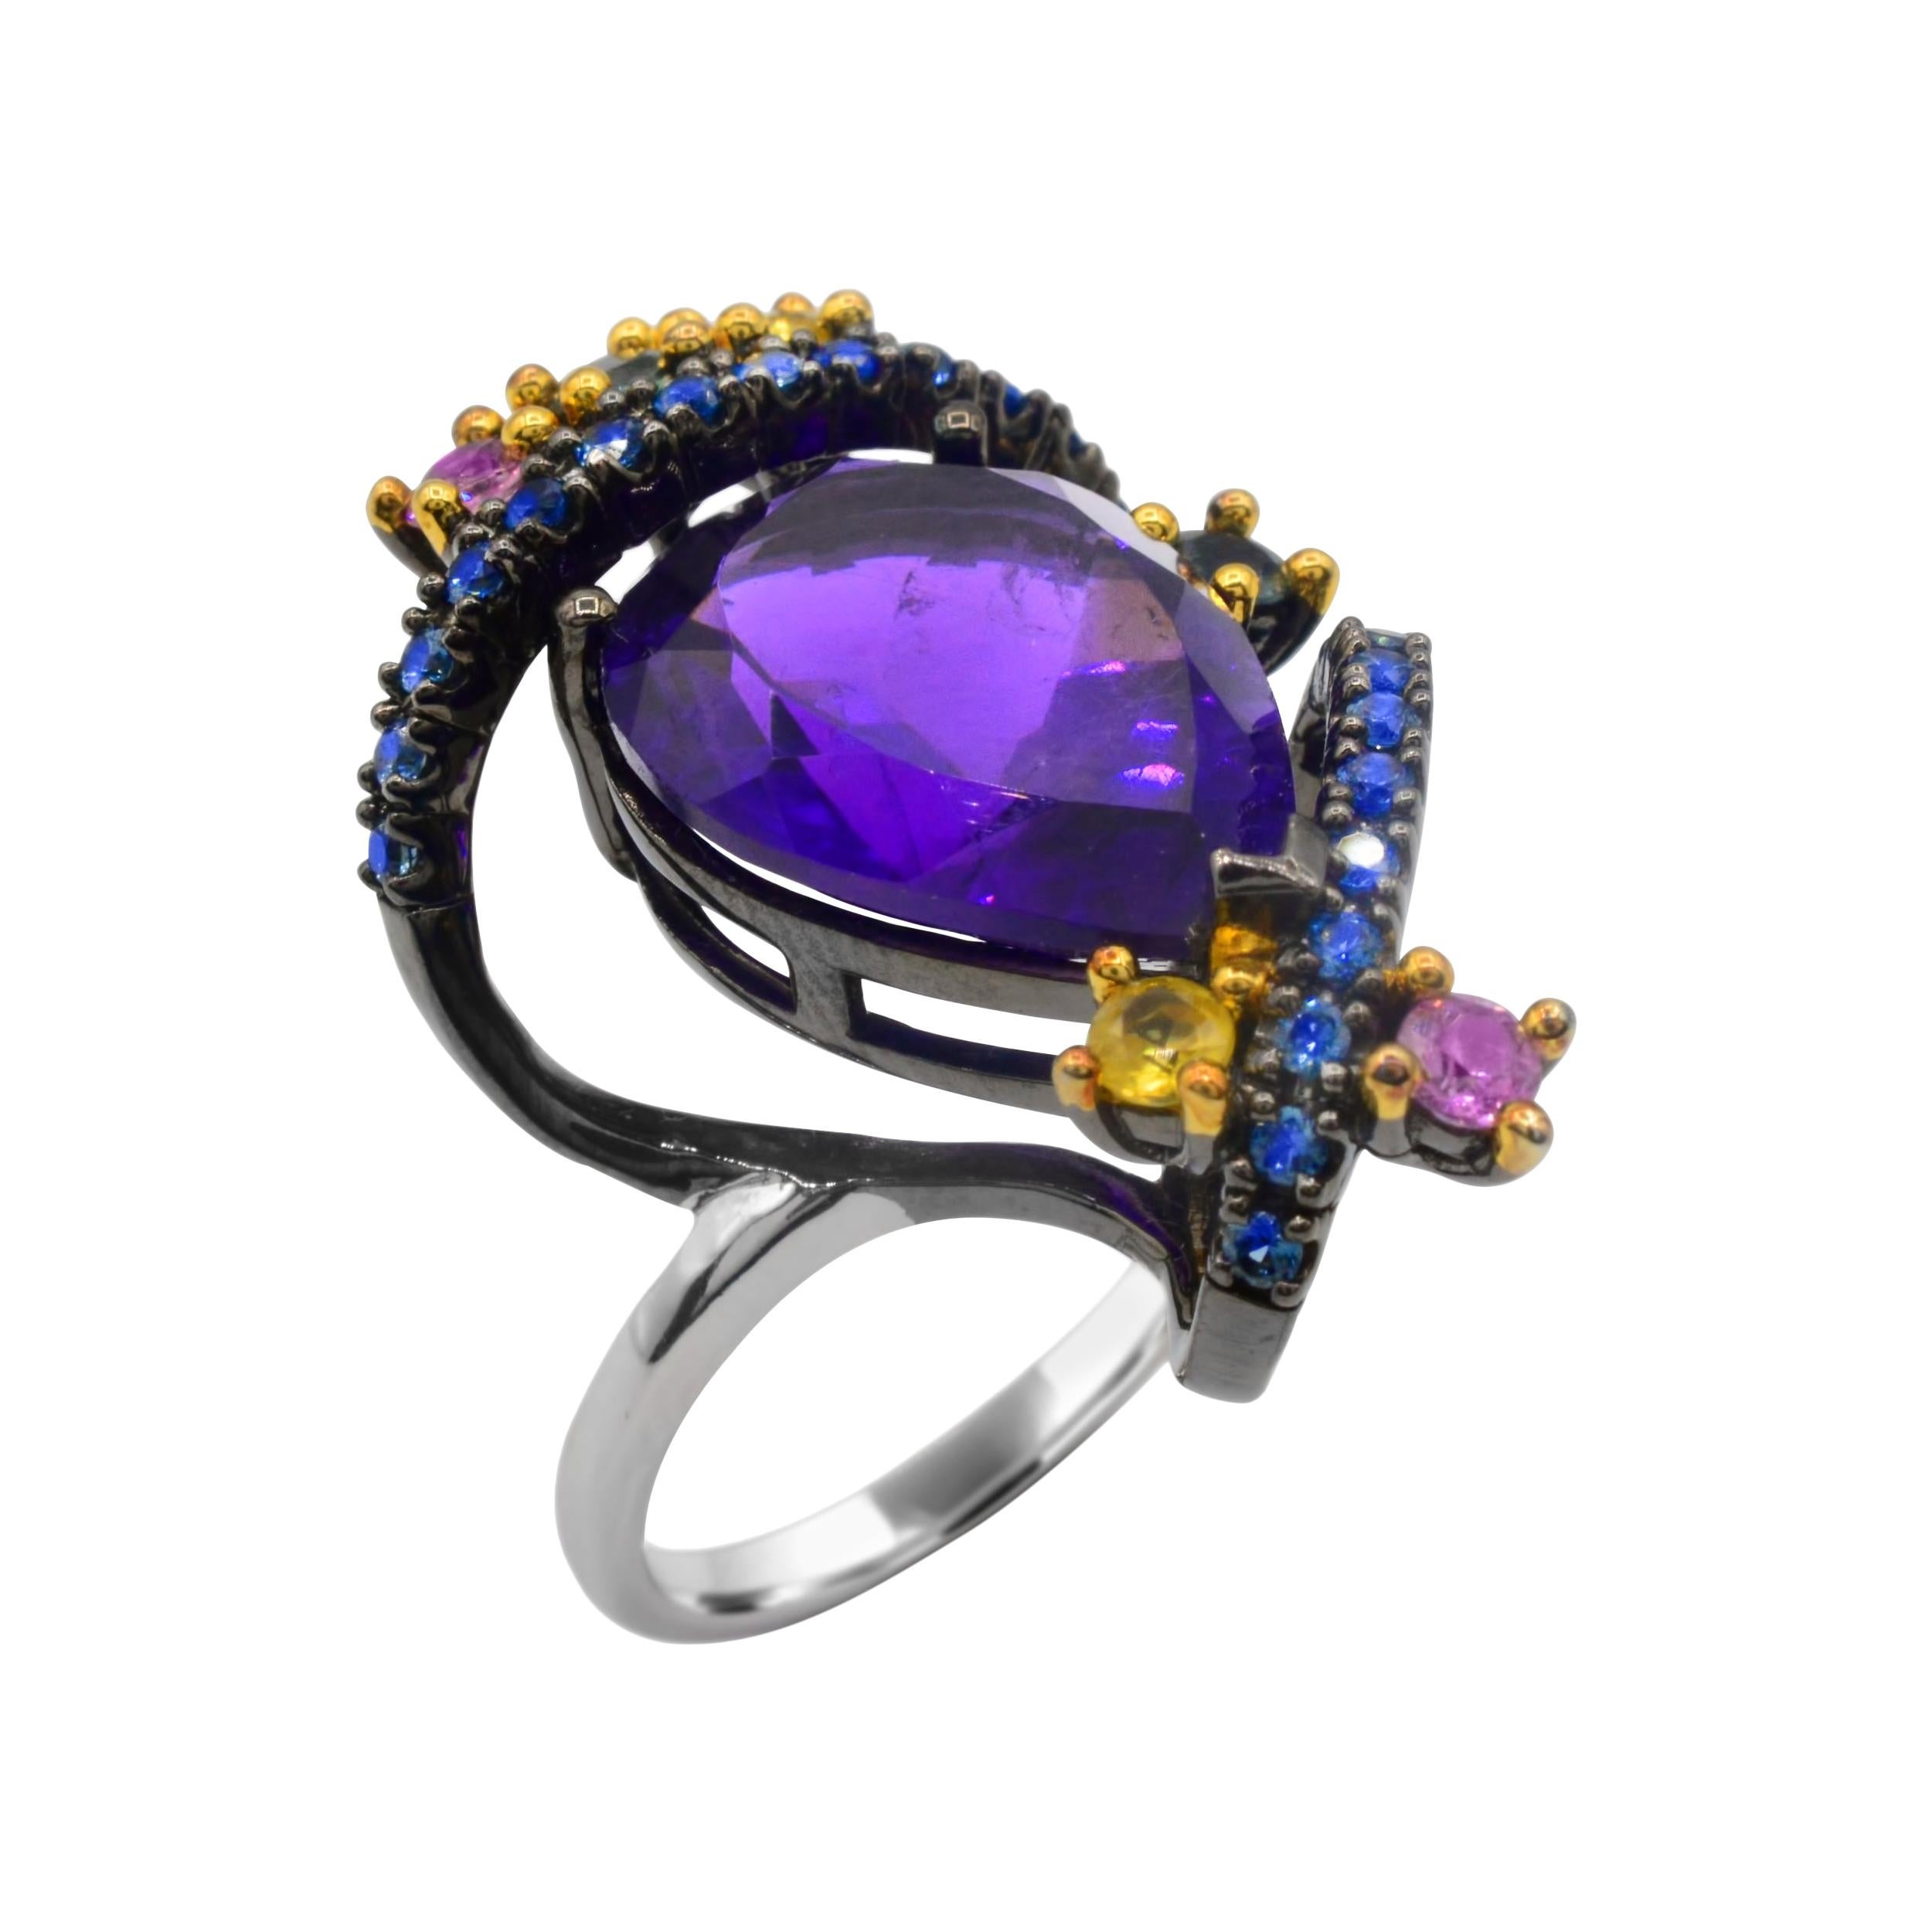 Sterling Silver 5.0 Carat Amethyst and Multi-Color Sapphire Cocktail Ring